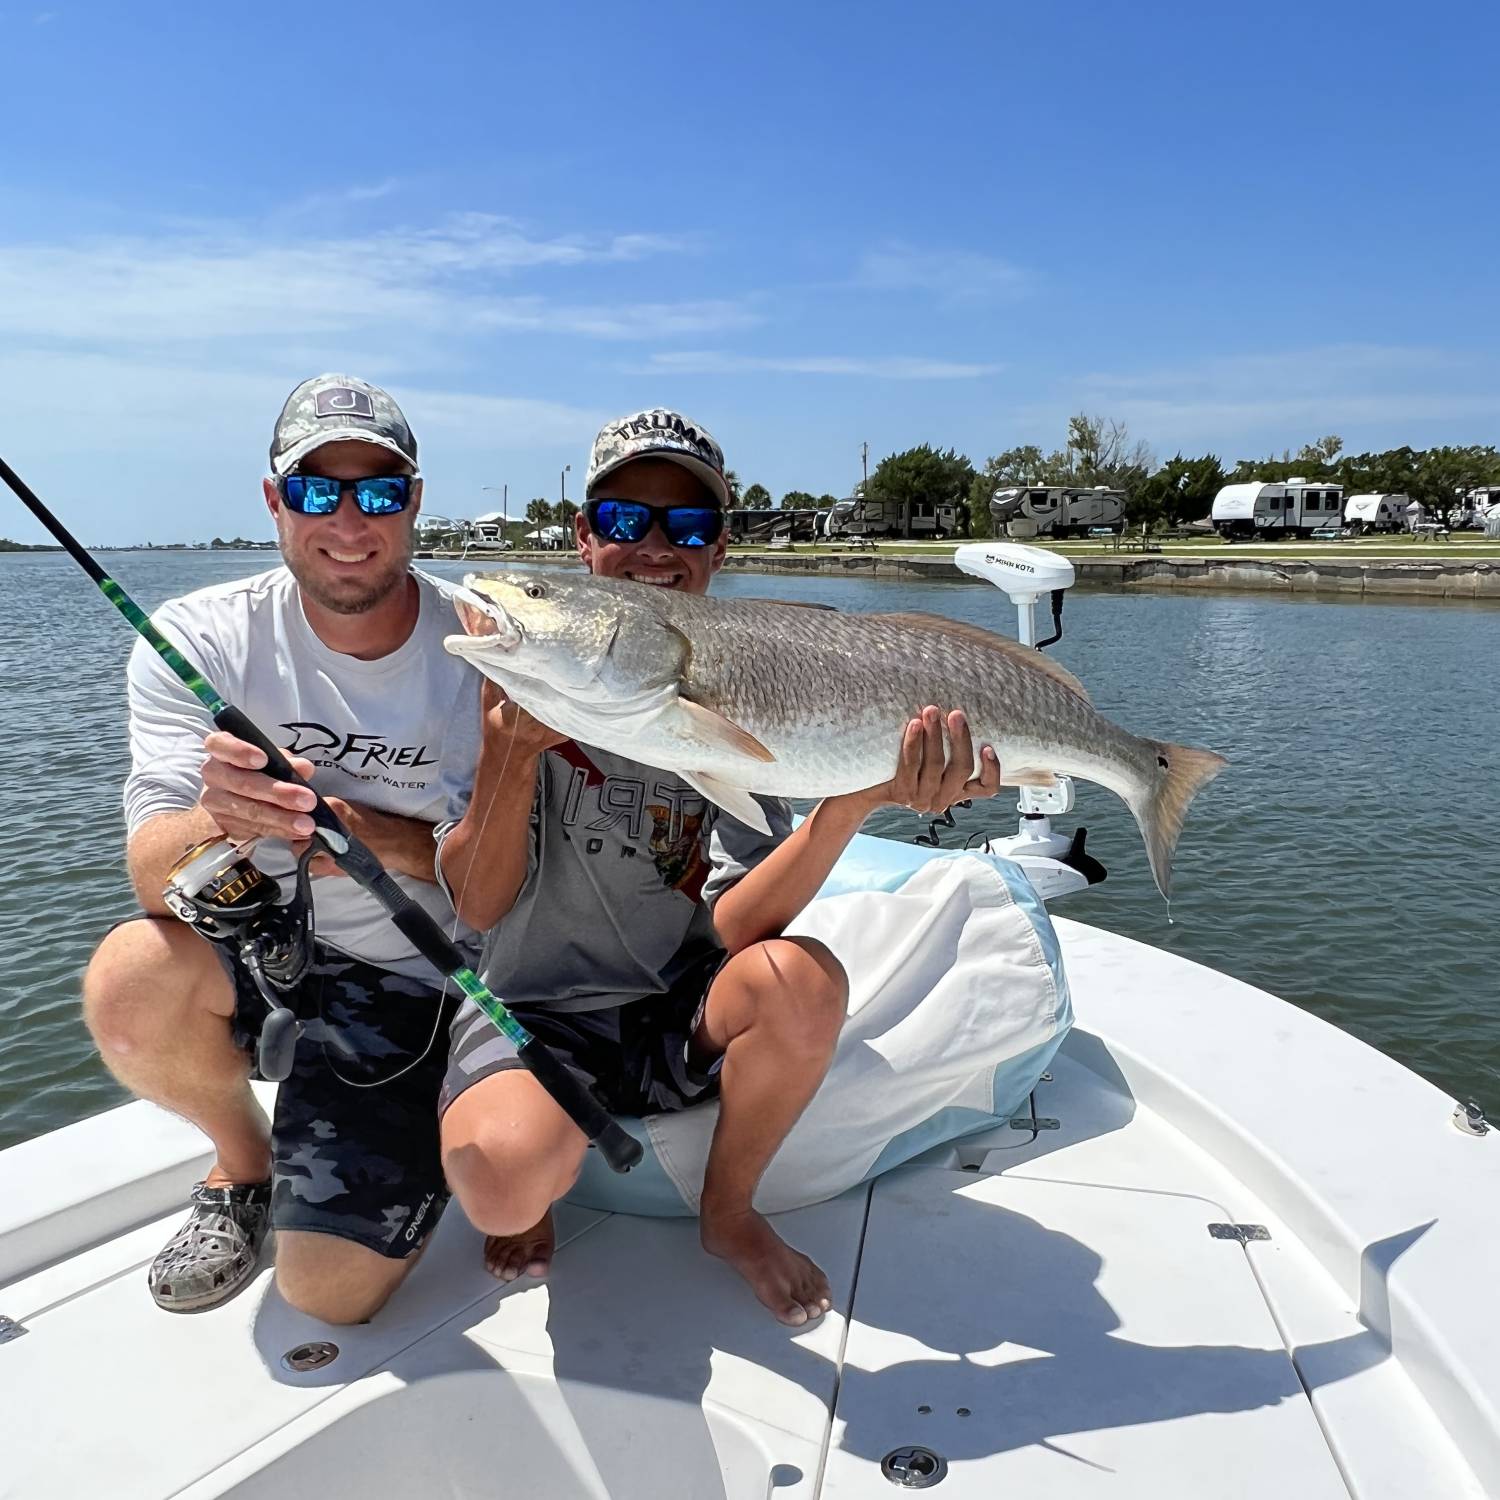 Our boy caught a fatty Red Fish in Mosquito Lagoon, Florida.